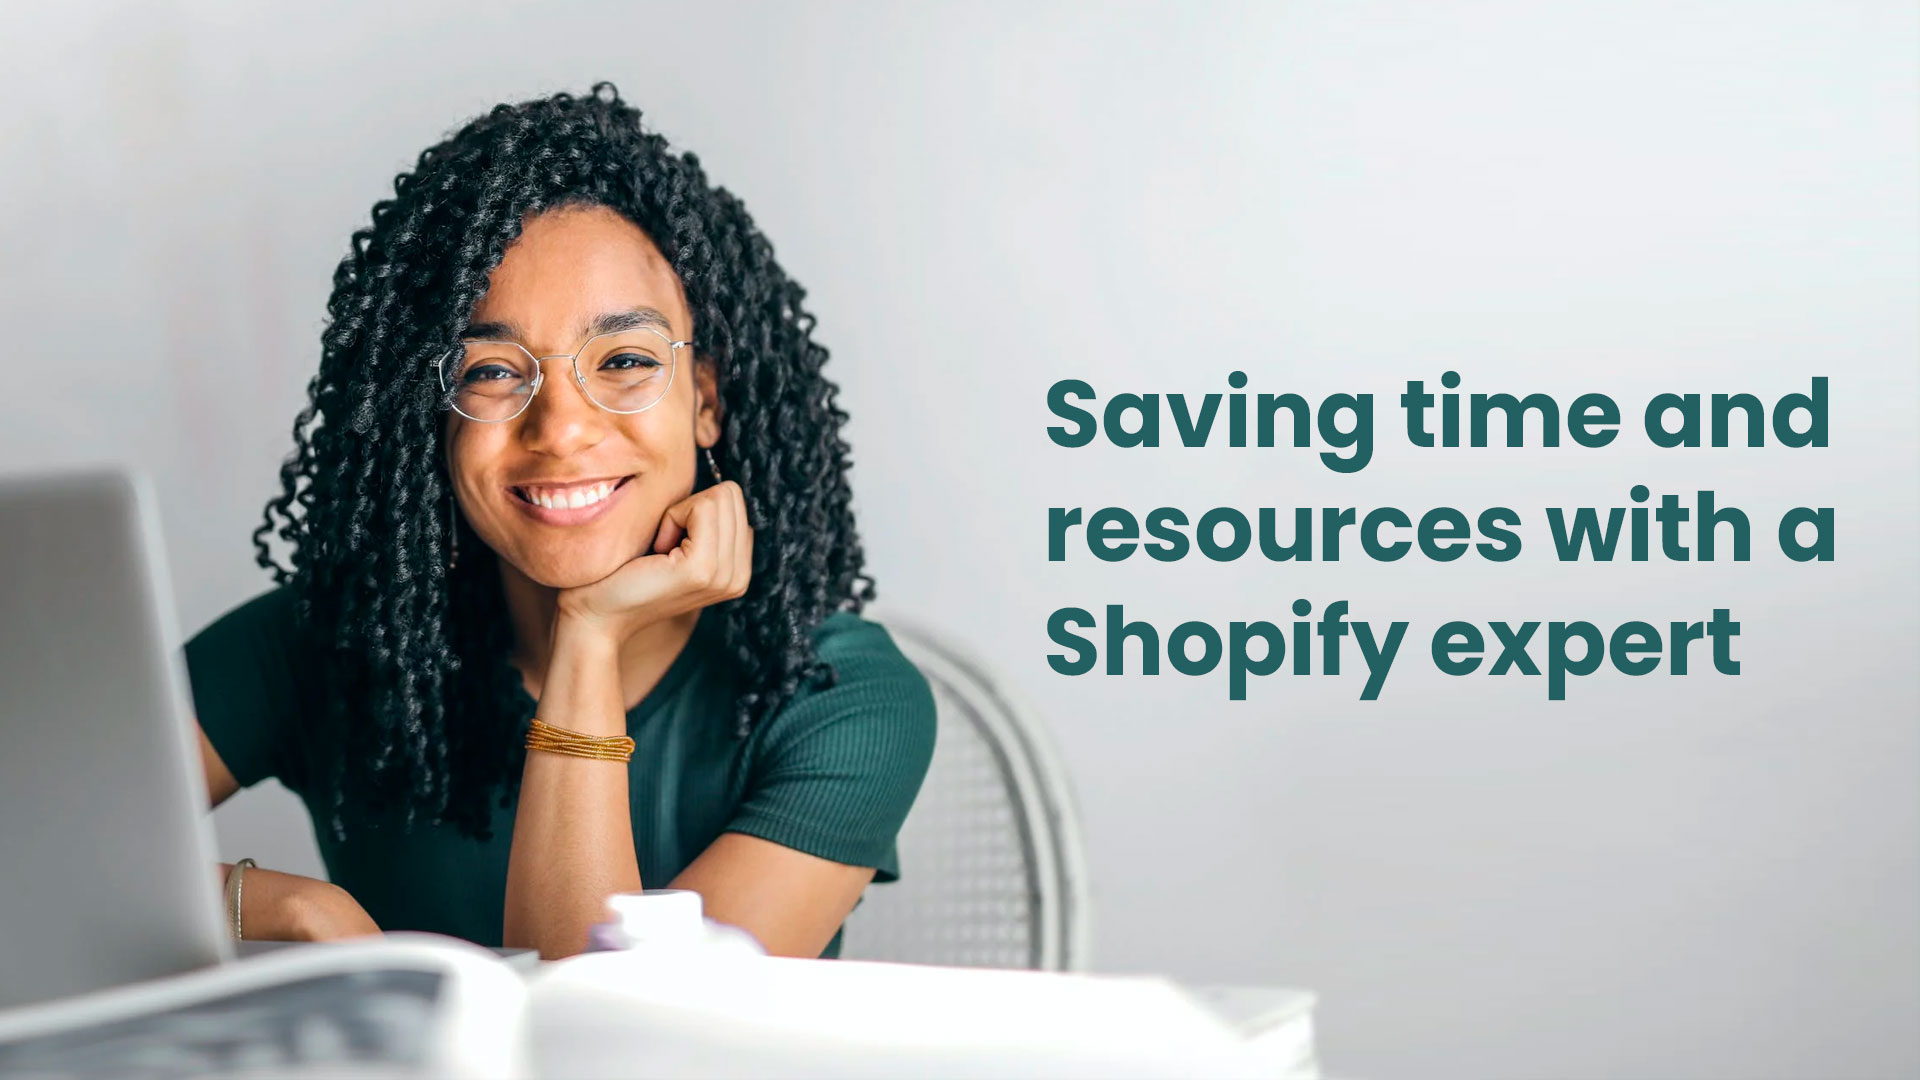 Saving time and resources with a Shopify expert